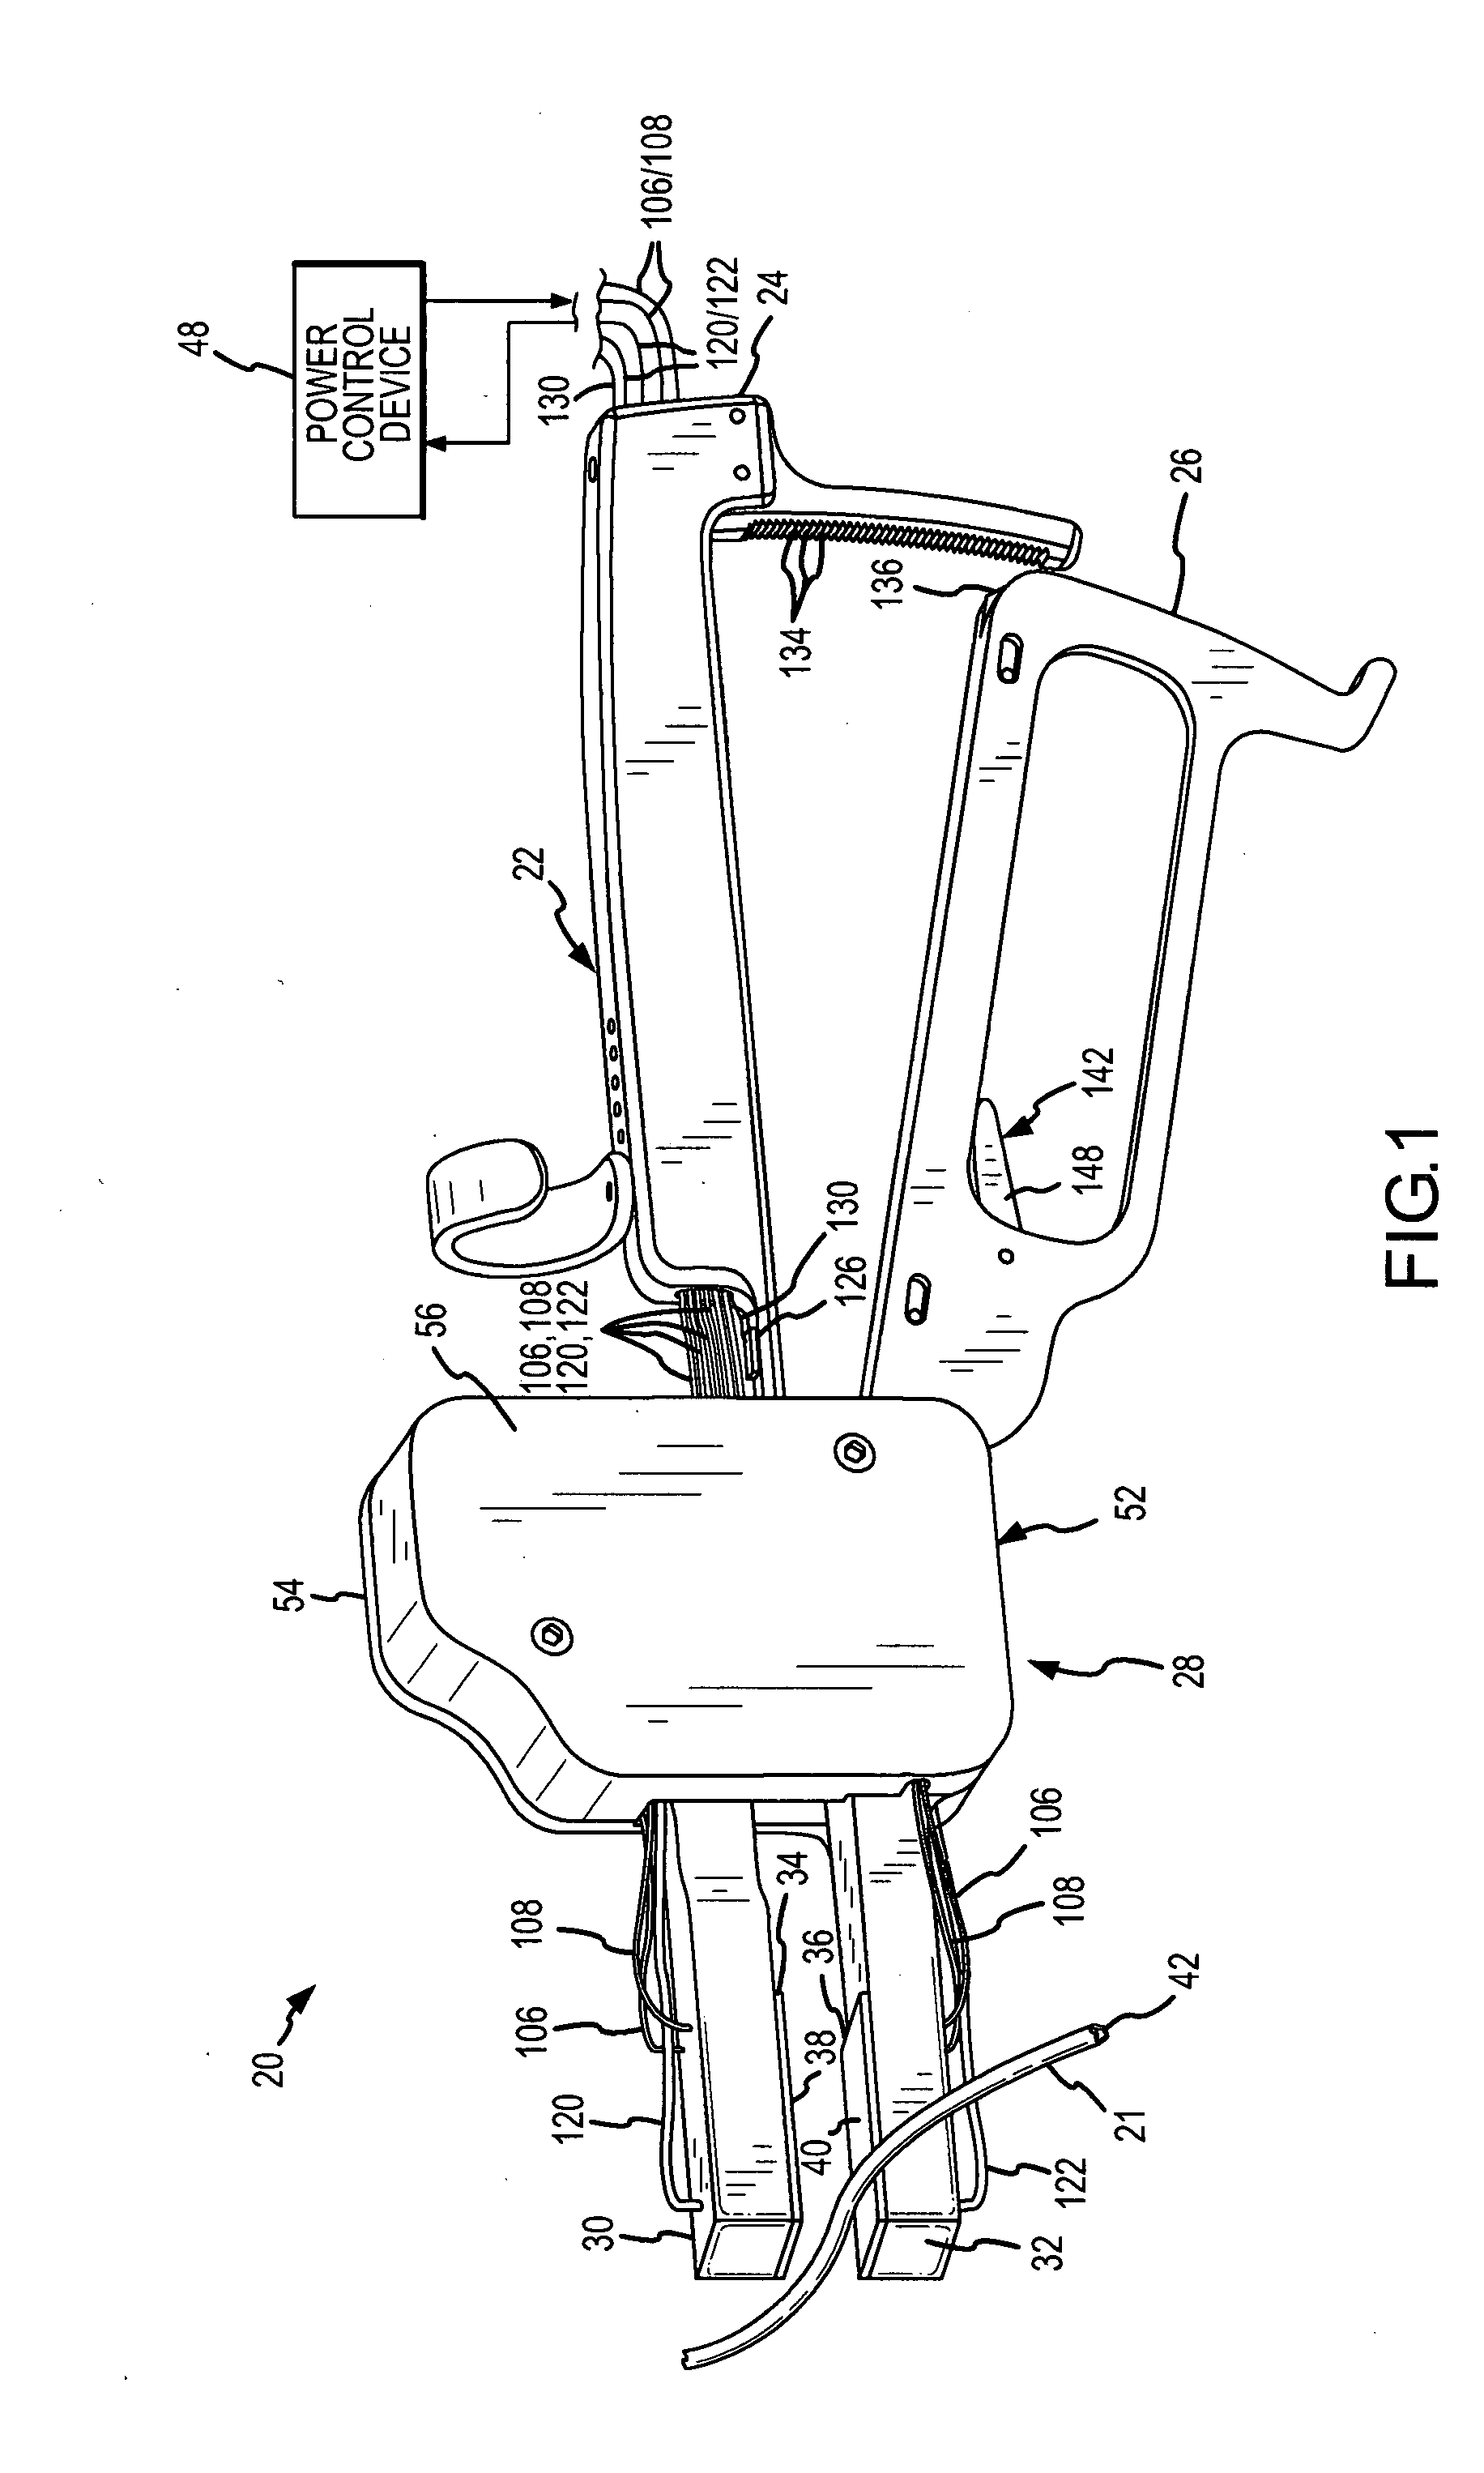 Tissue fusion instrument and method to reduce the adhesion of tissue to its working surfaces